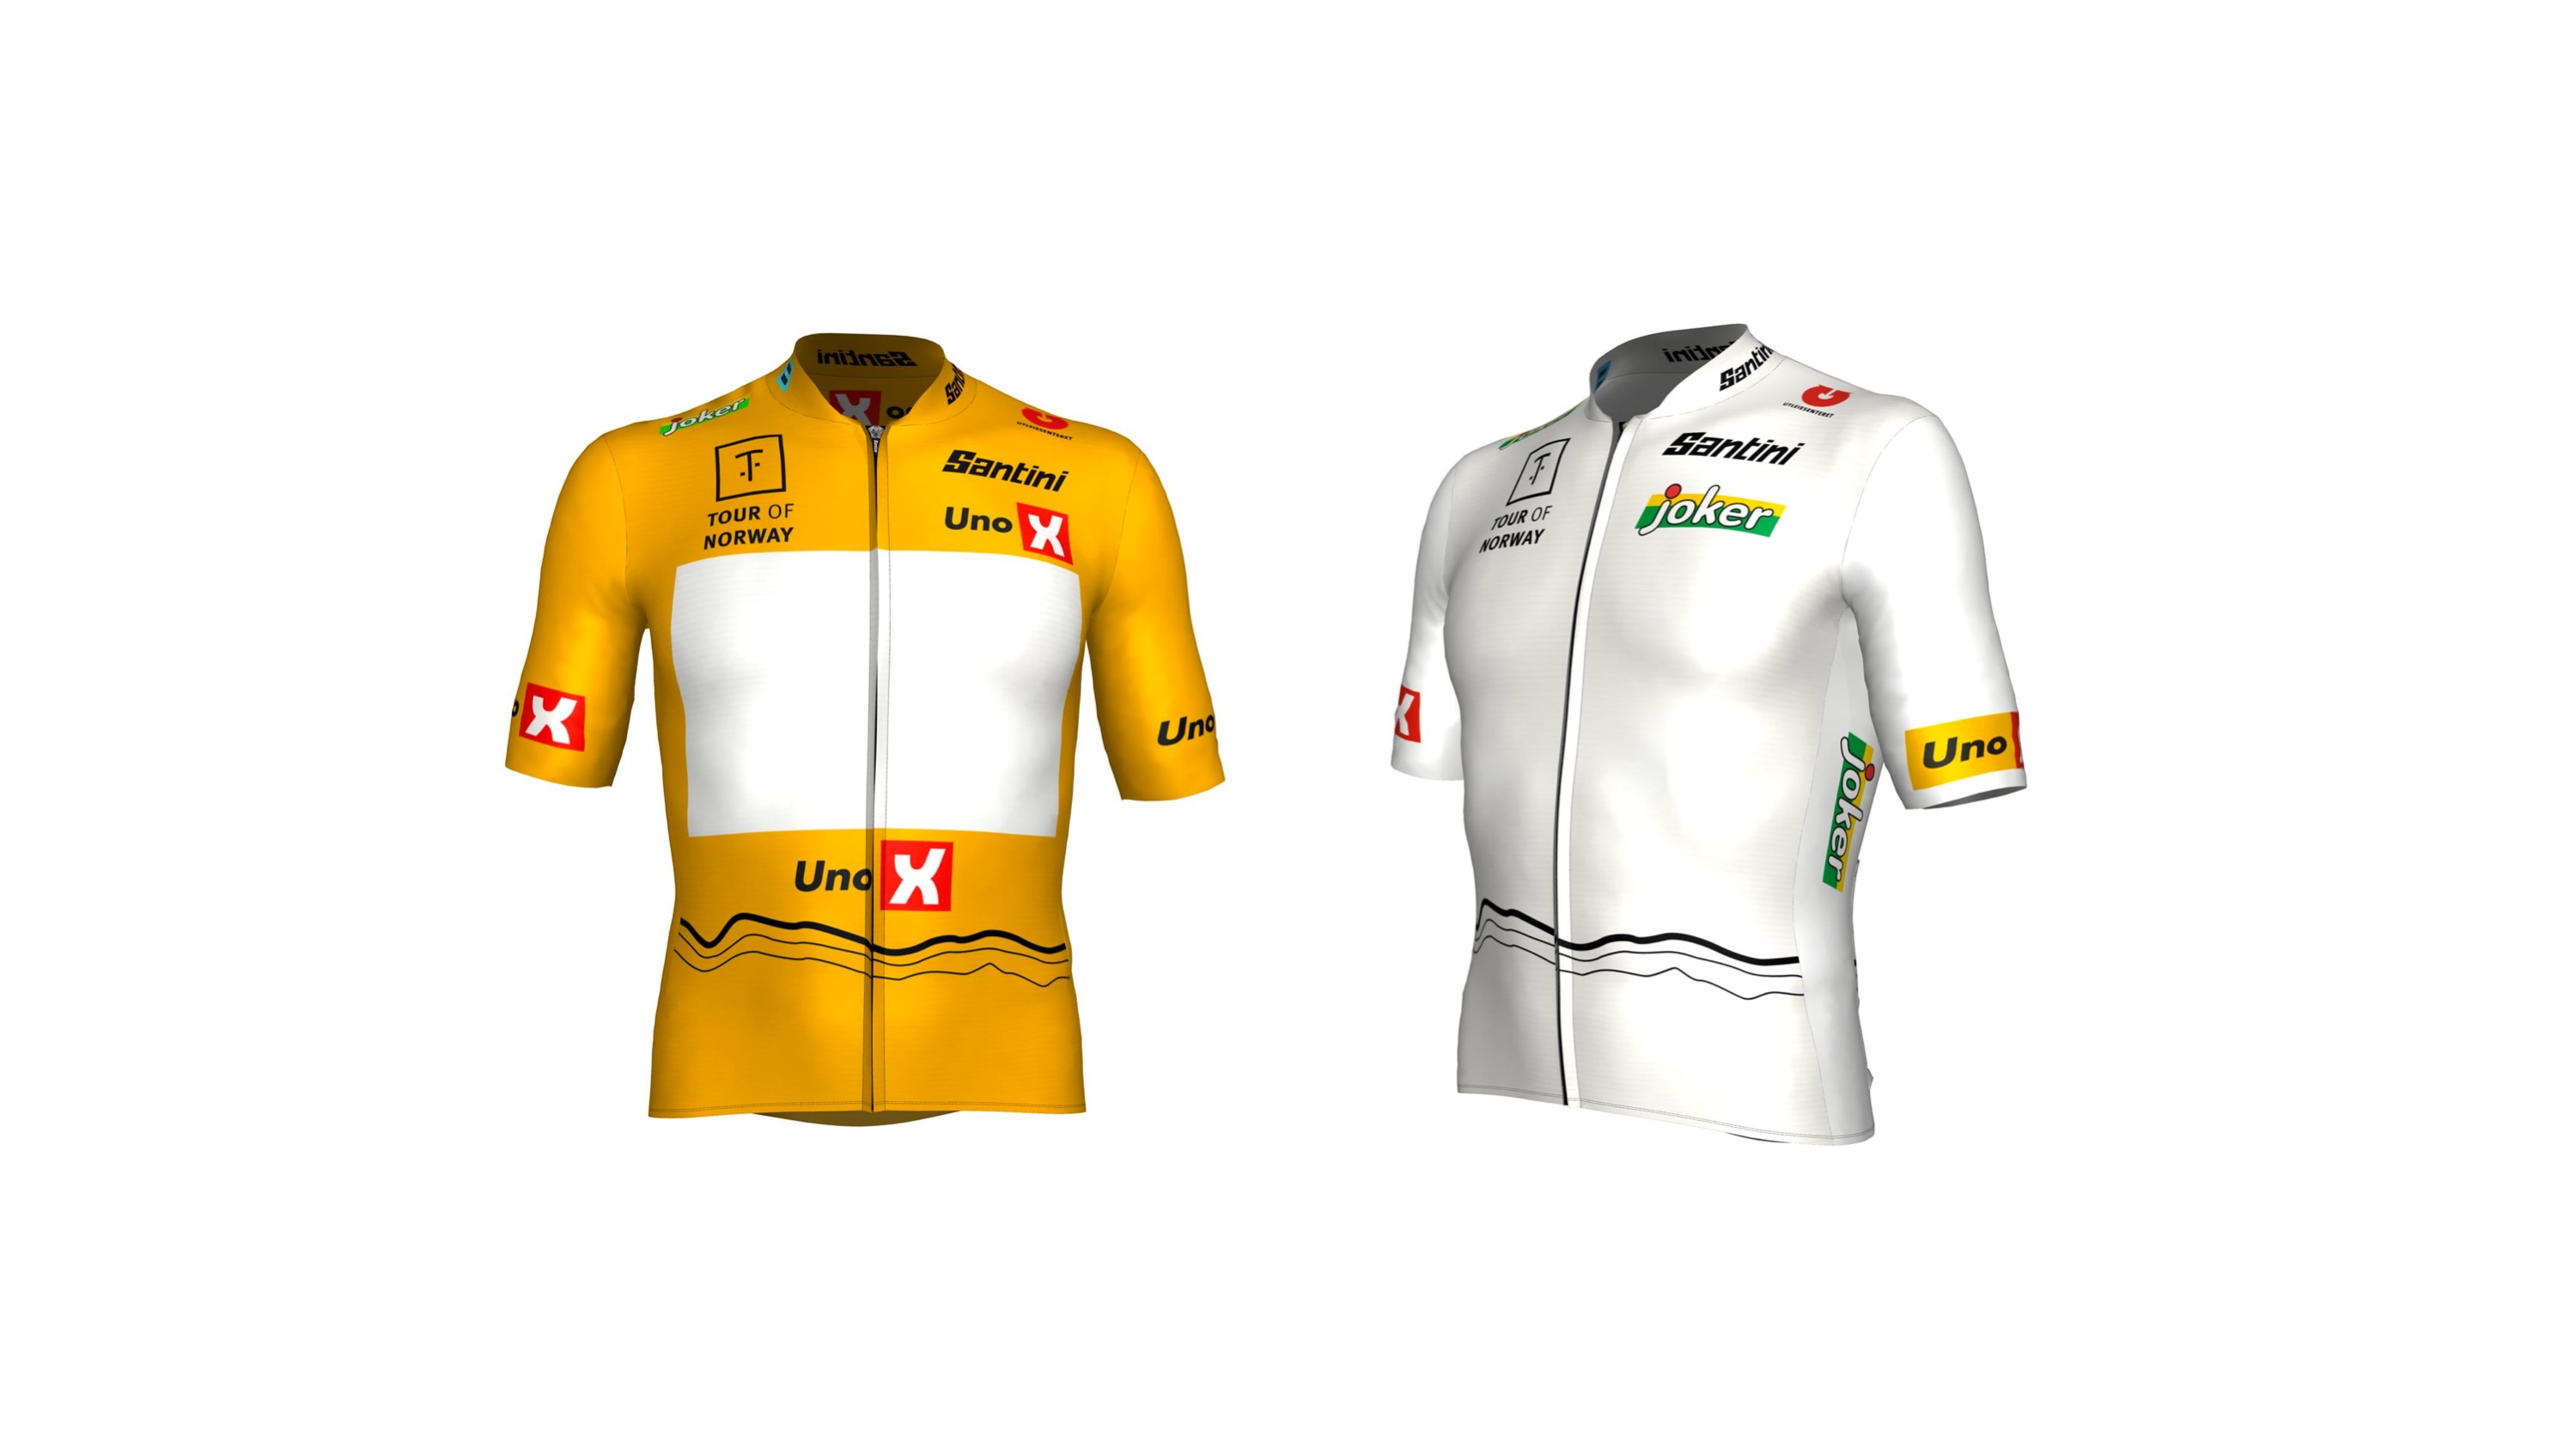 Discover Tour of Norway's jerseys by Santini!